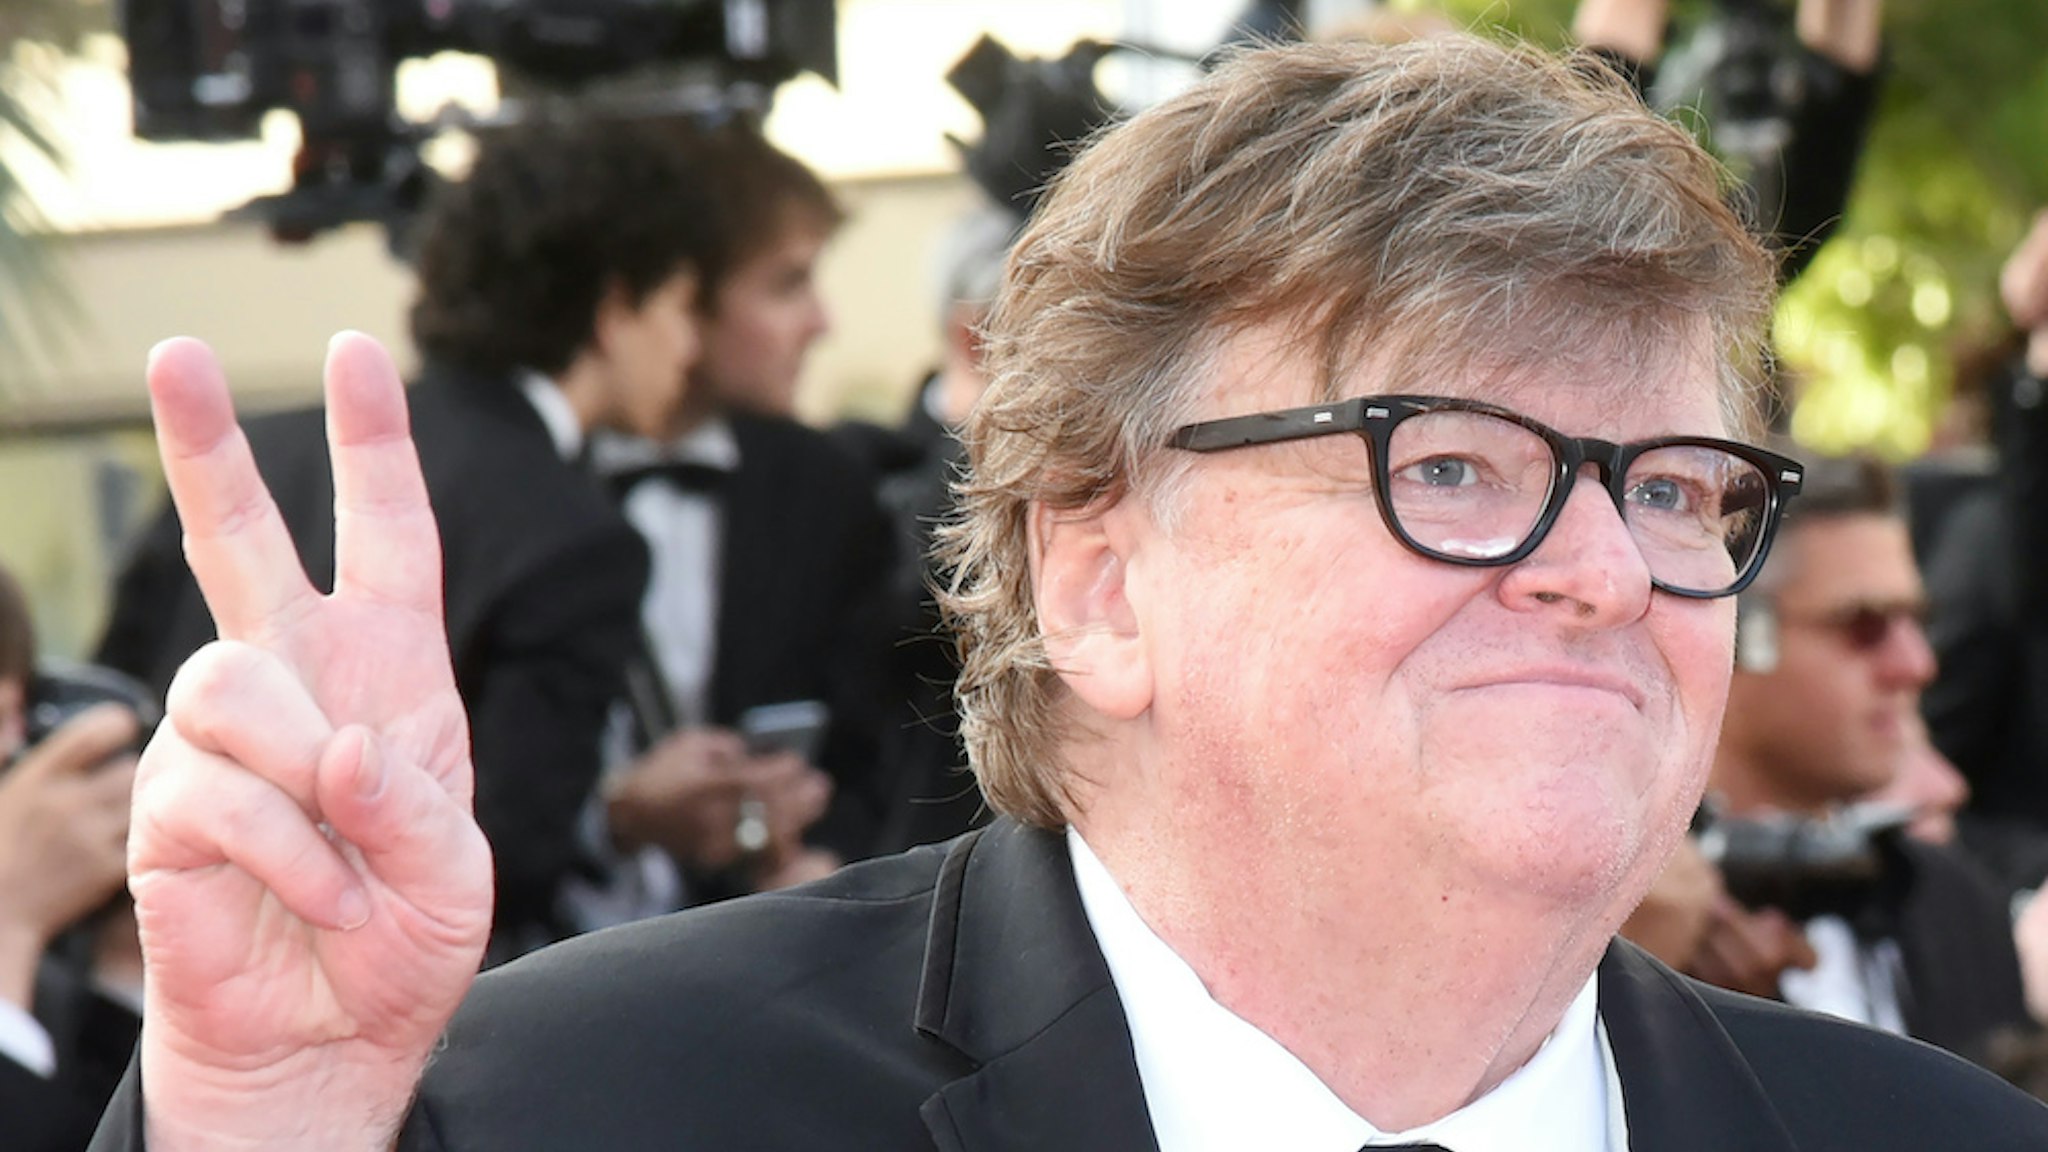 Michael Moore attends the closing ceremony screening of "The Specials" during the 72nd annual Cannes Film Festival on May 25, 2019 in Cannes, France. (Photo by Foc Kan/FilmMagic)